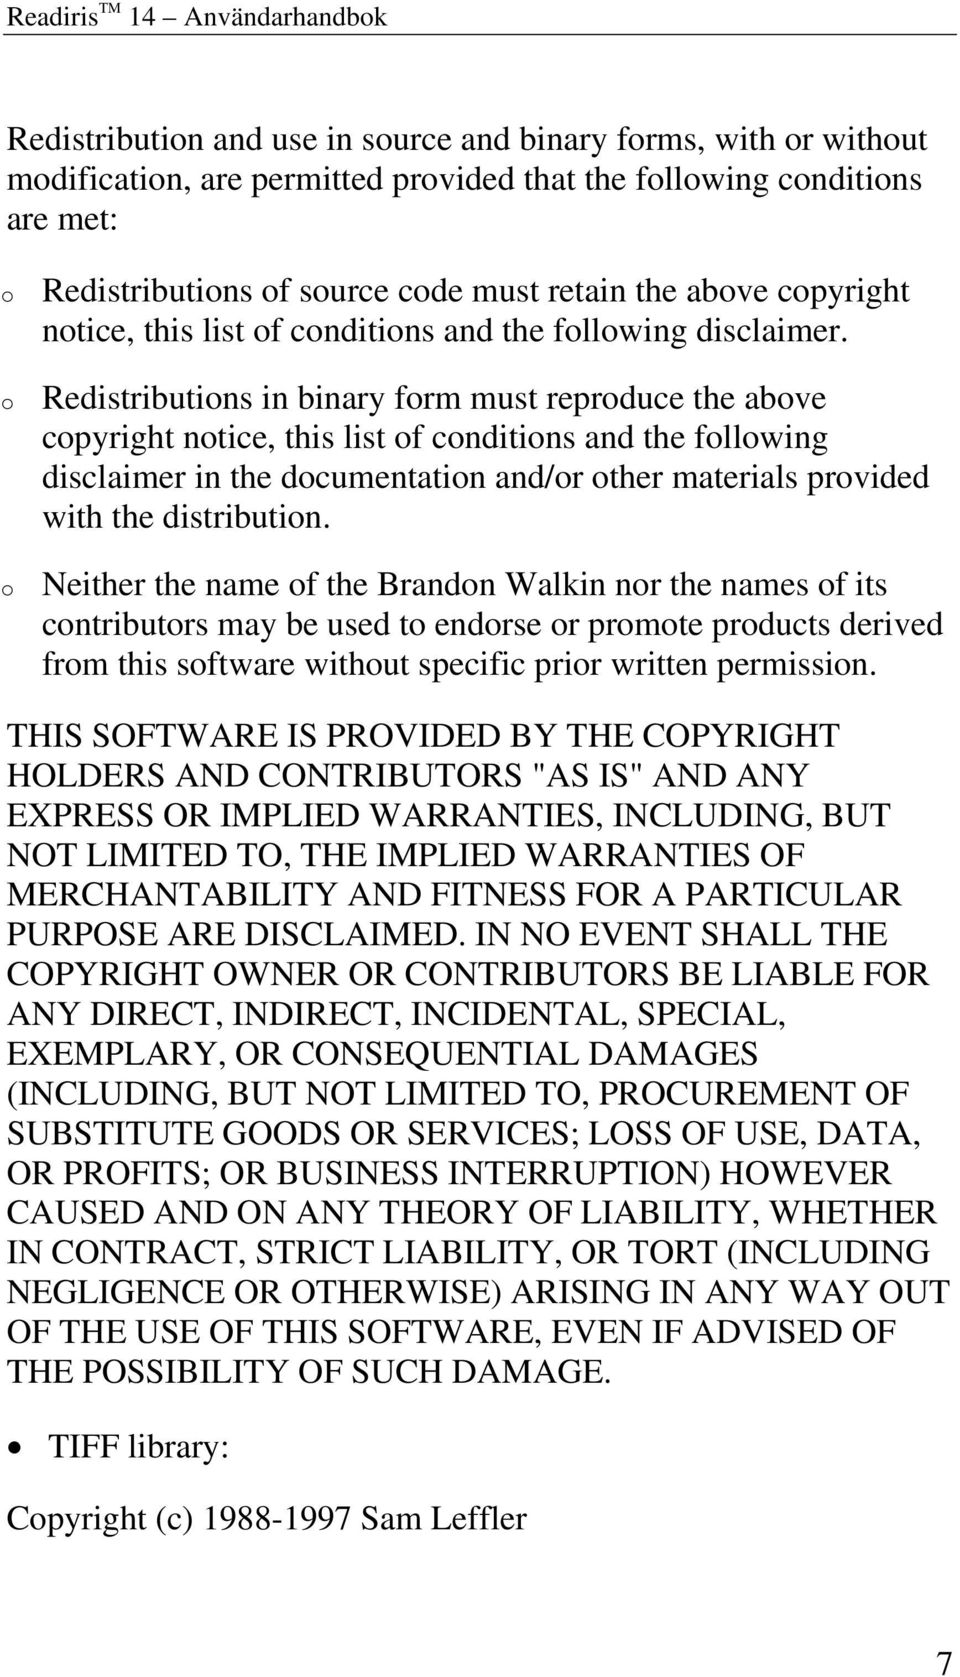 Redistributions in binary form must reproduce the above copyright notice, this list of conditions and the following disclaimer in the documentation and/or other materials provided with the